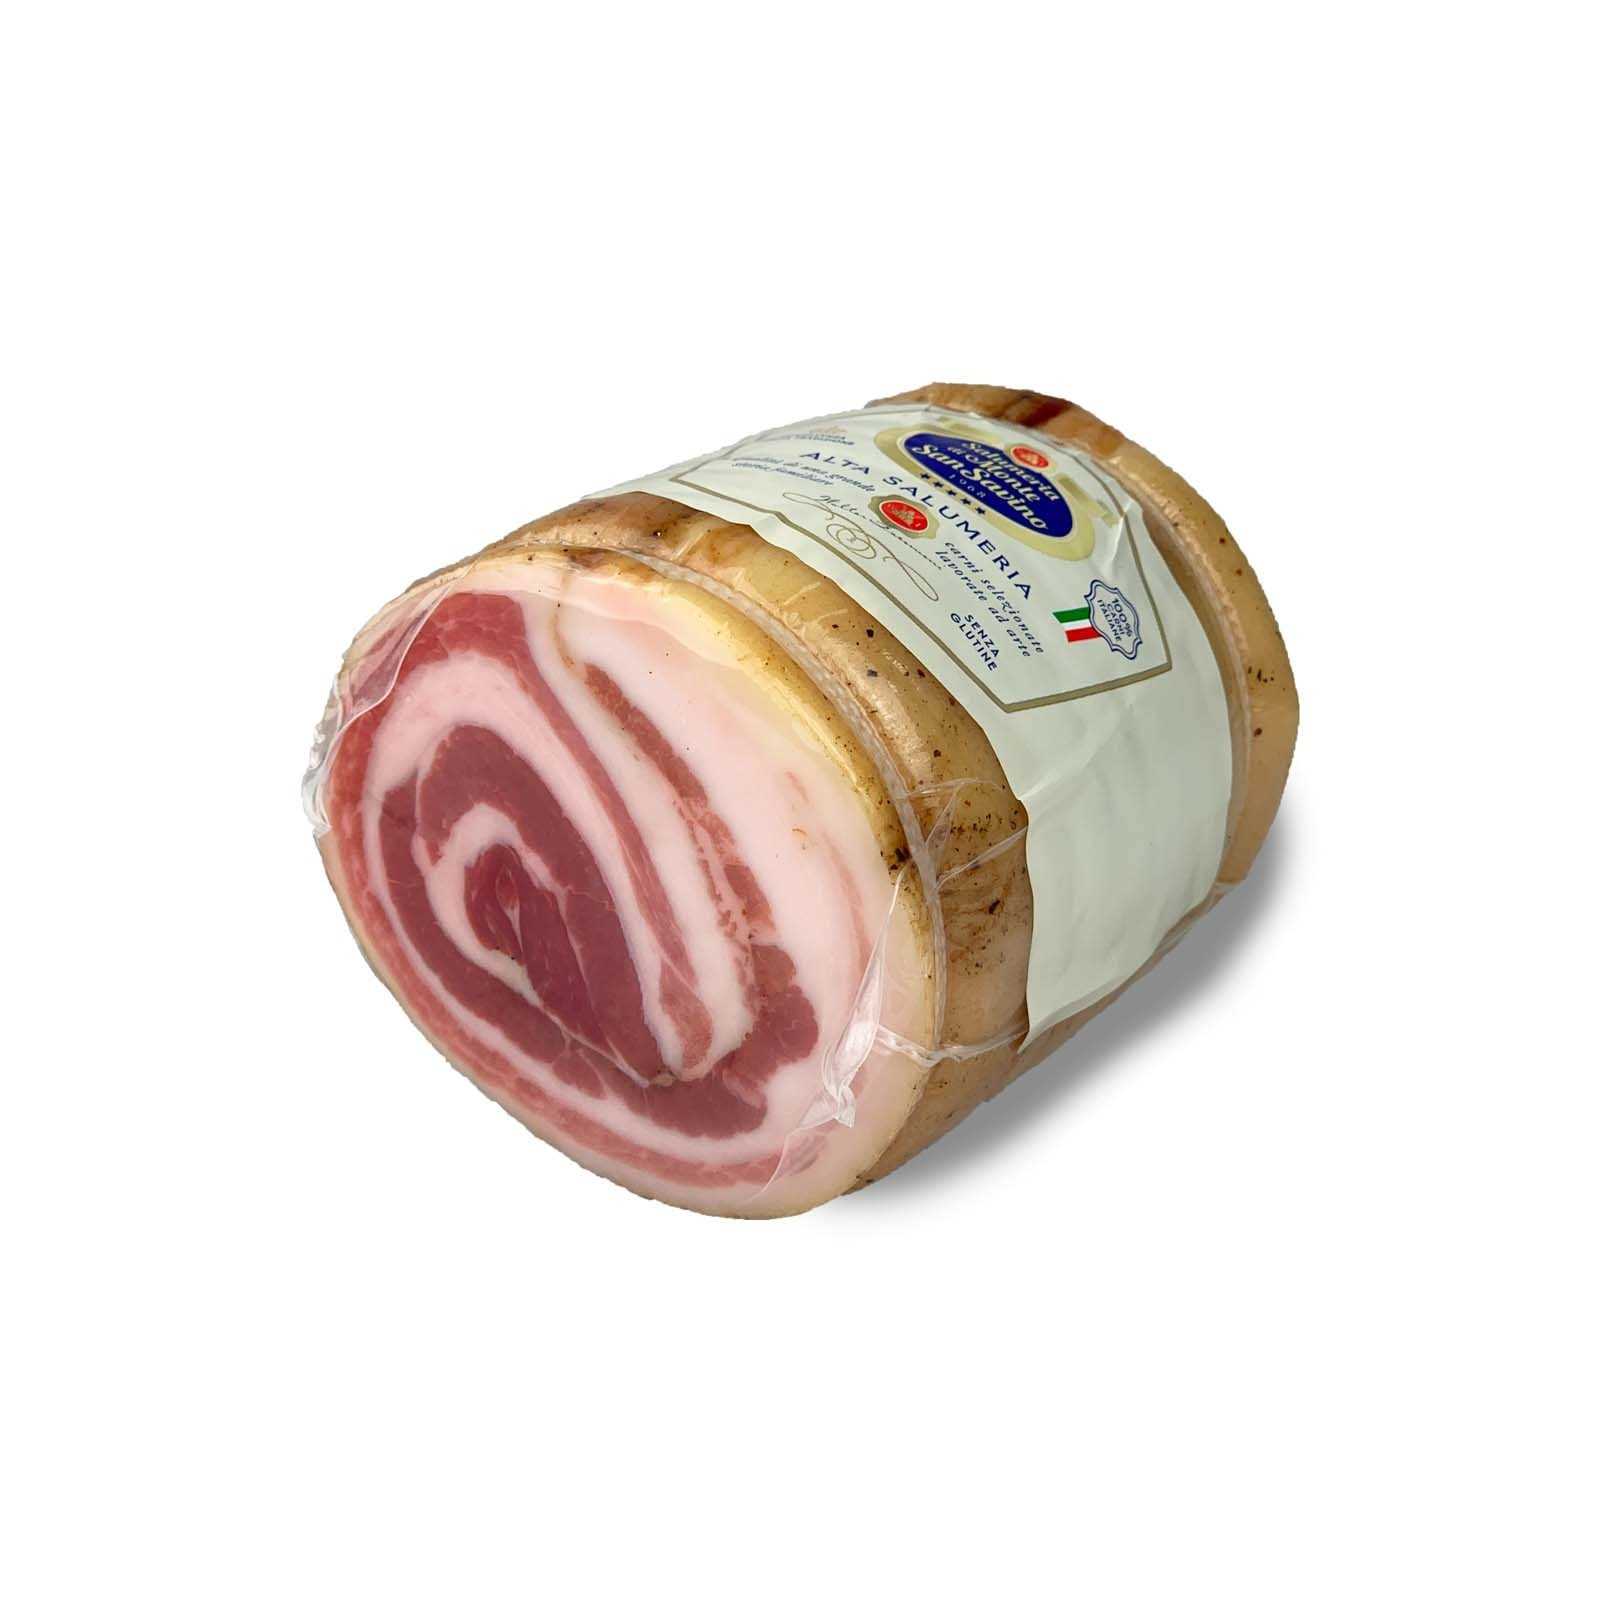 Tuscan Rolled Bacon.